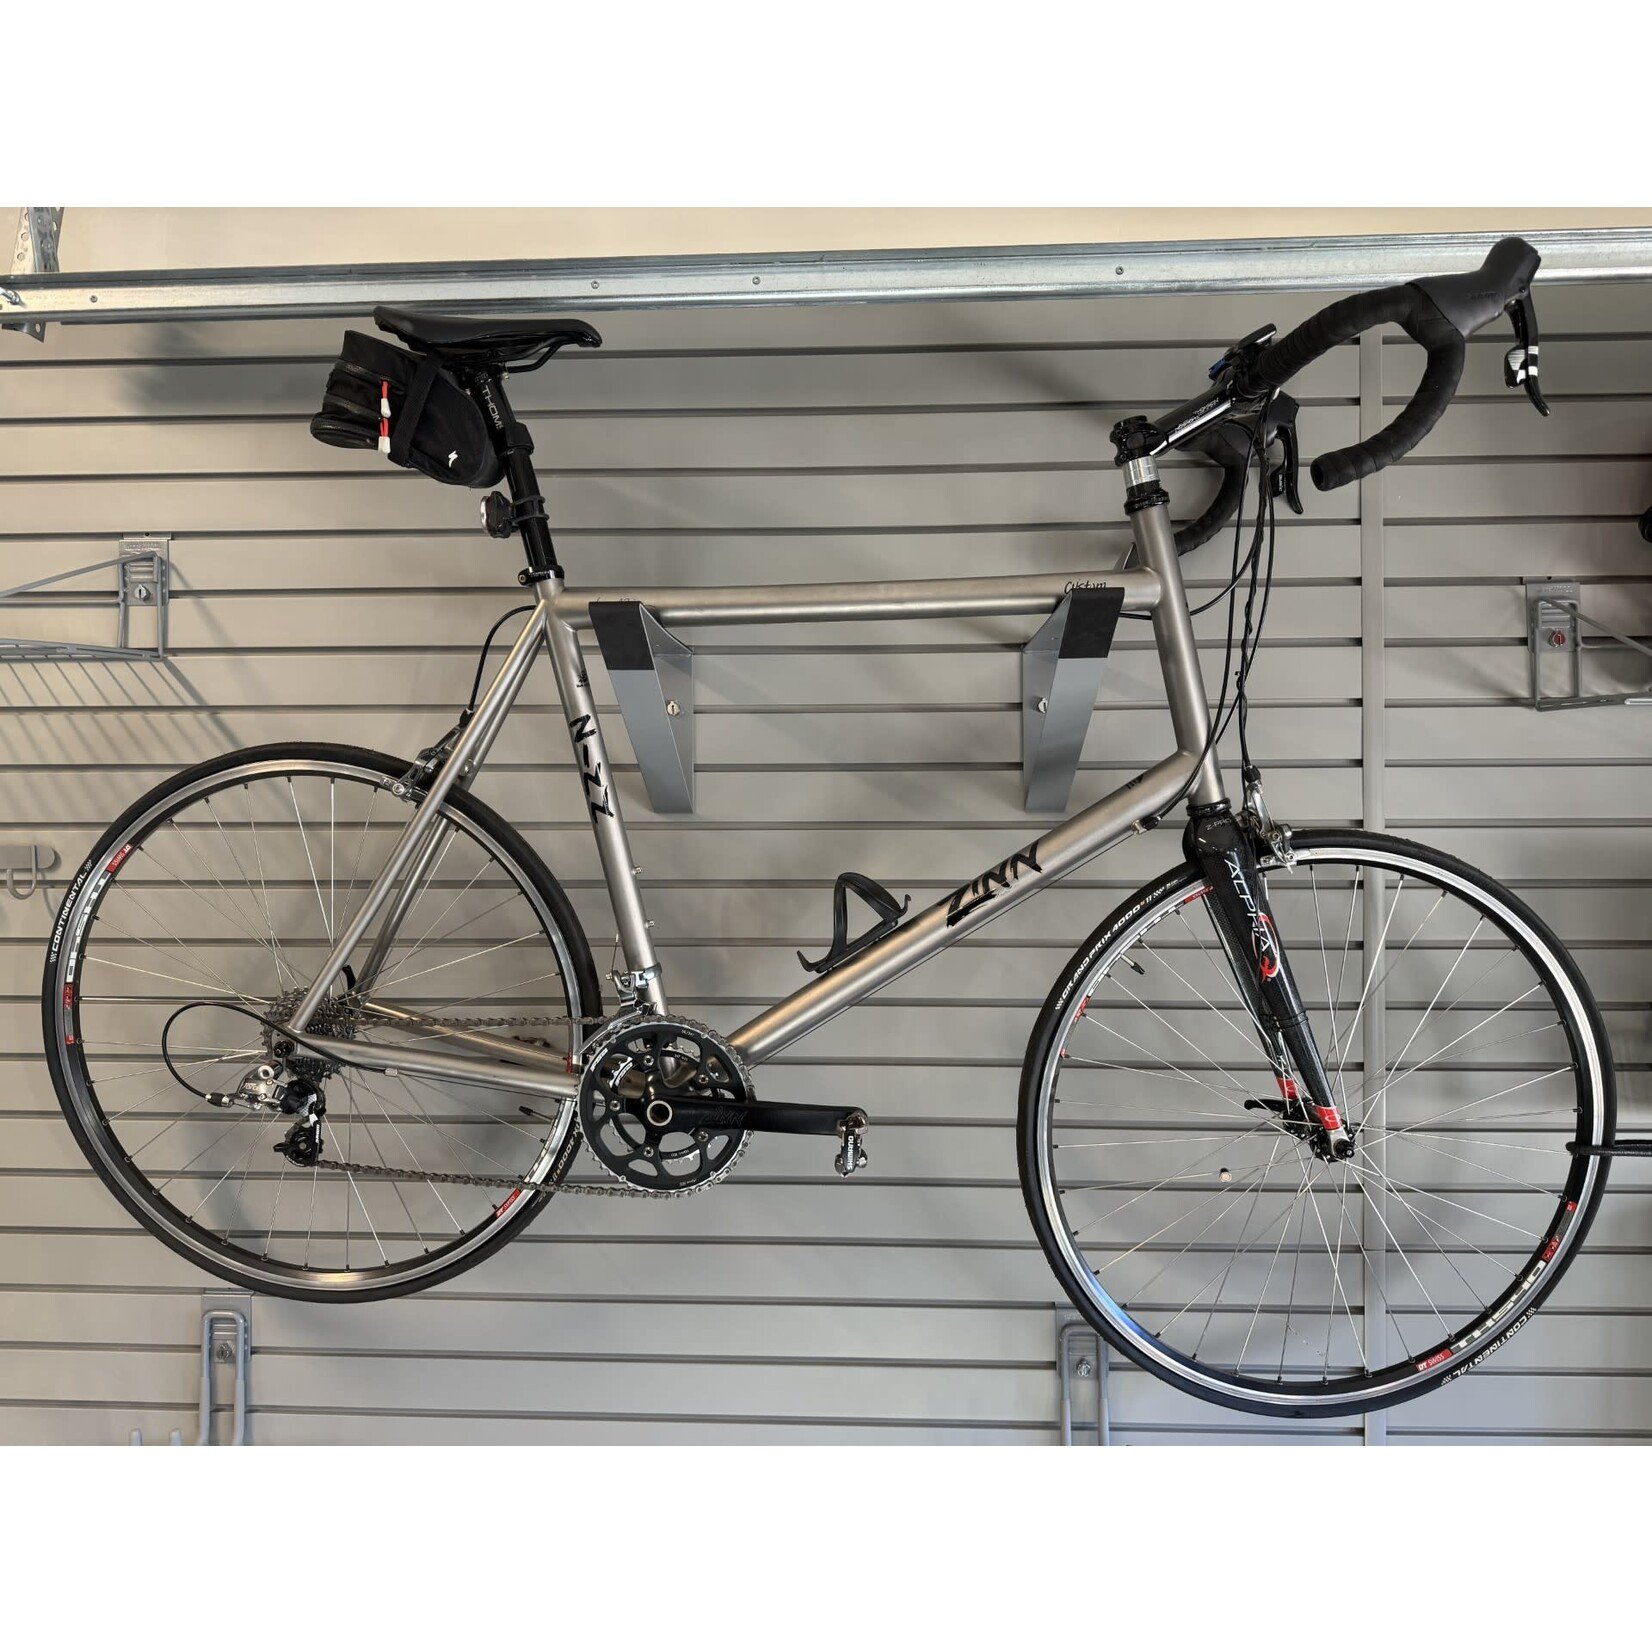 Zinn Cycles Zinn Custom Titanium Road Bike - Used in excellent condition for 6'9" to 7'2" rider